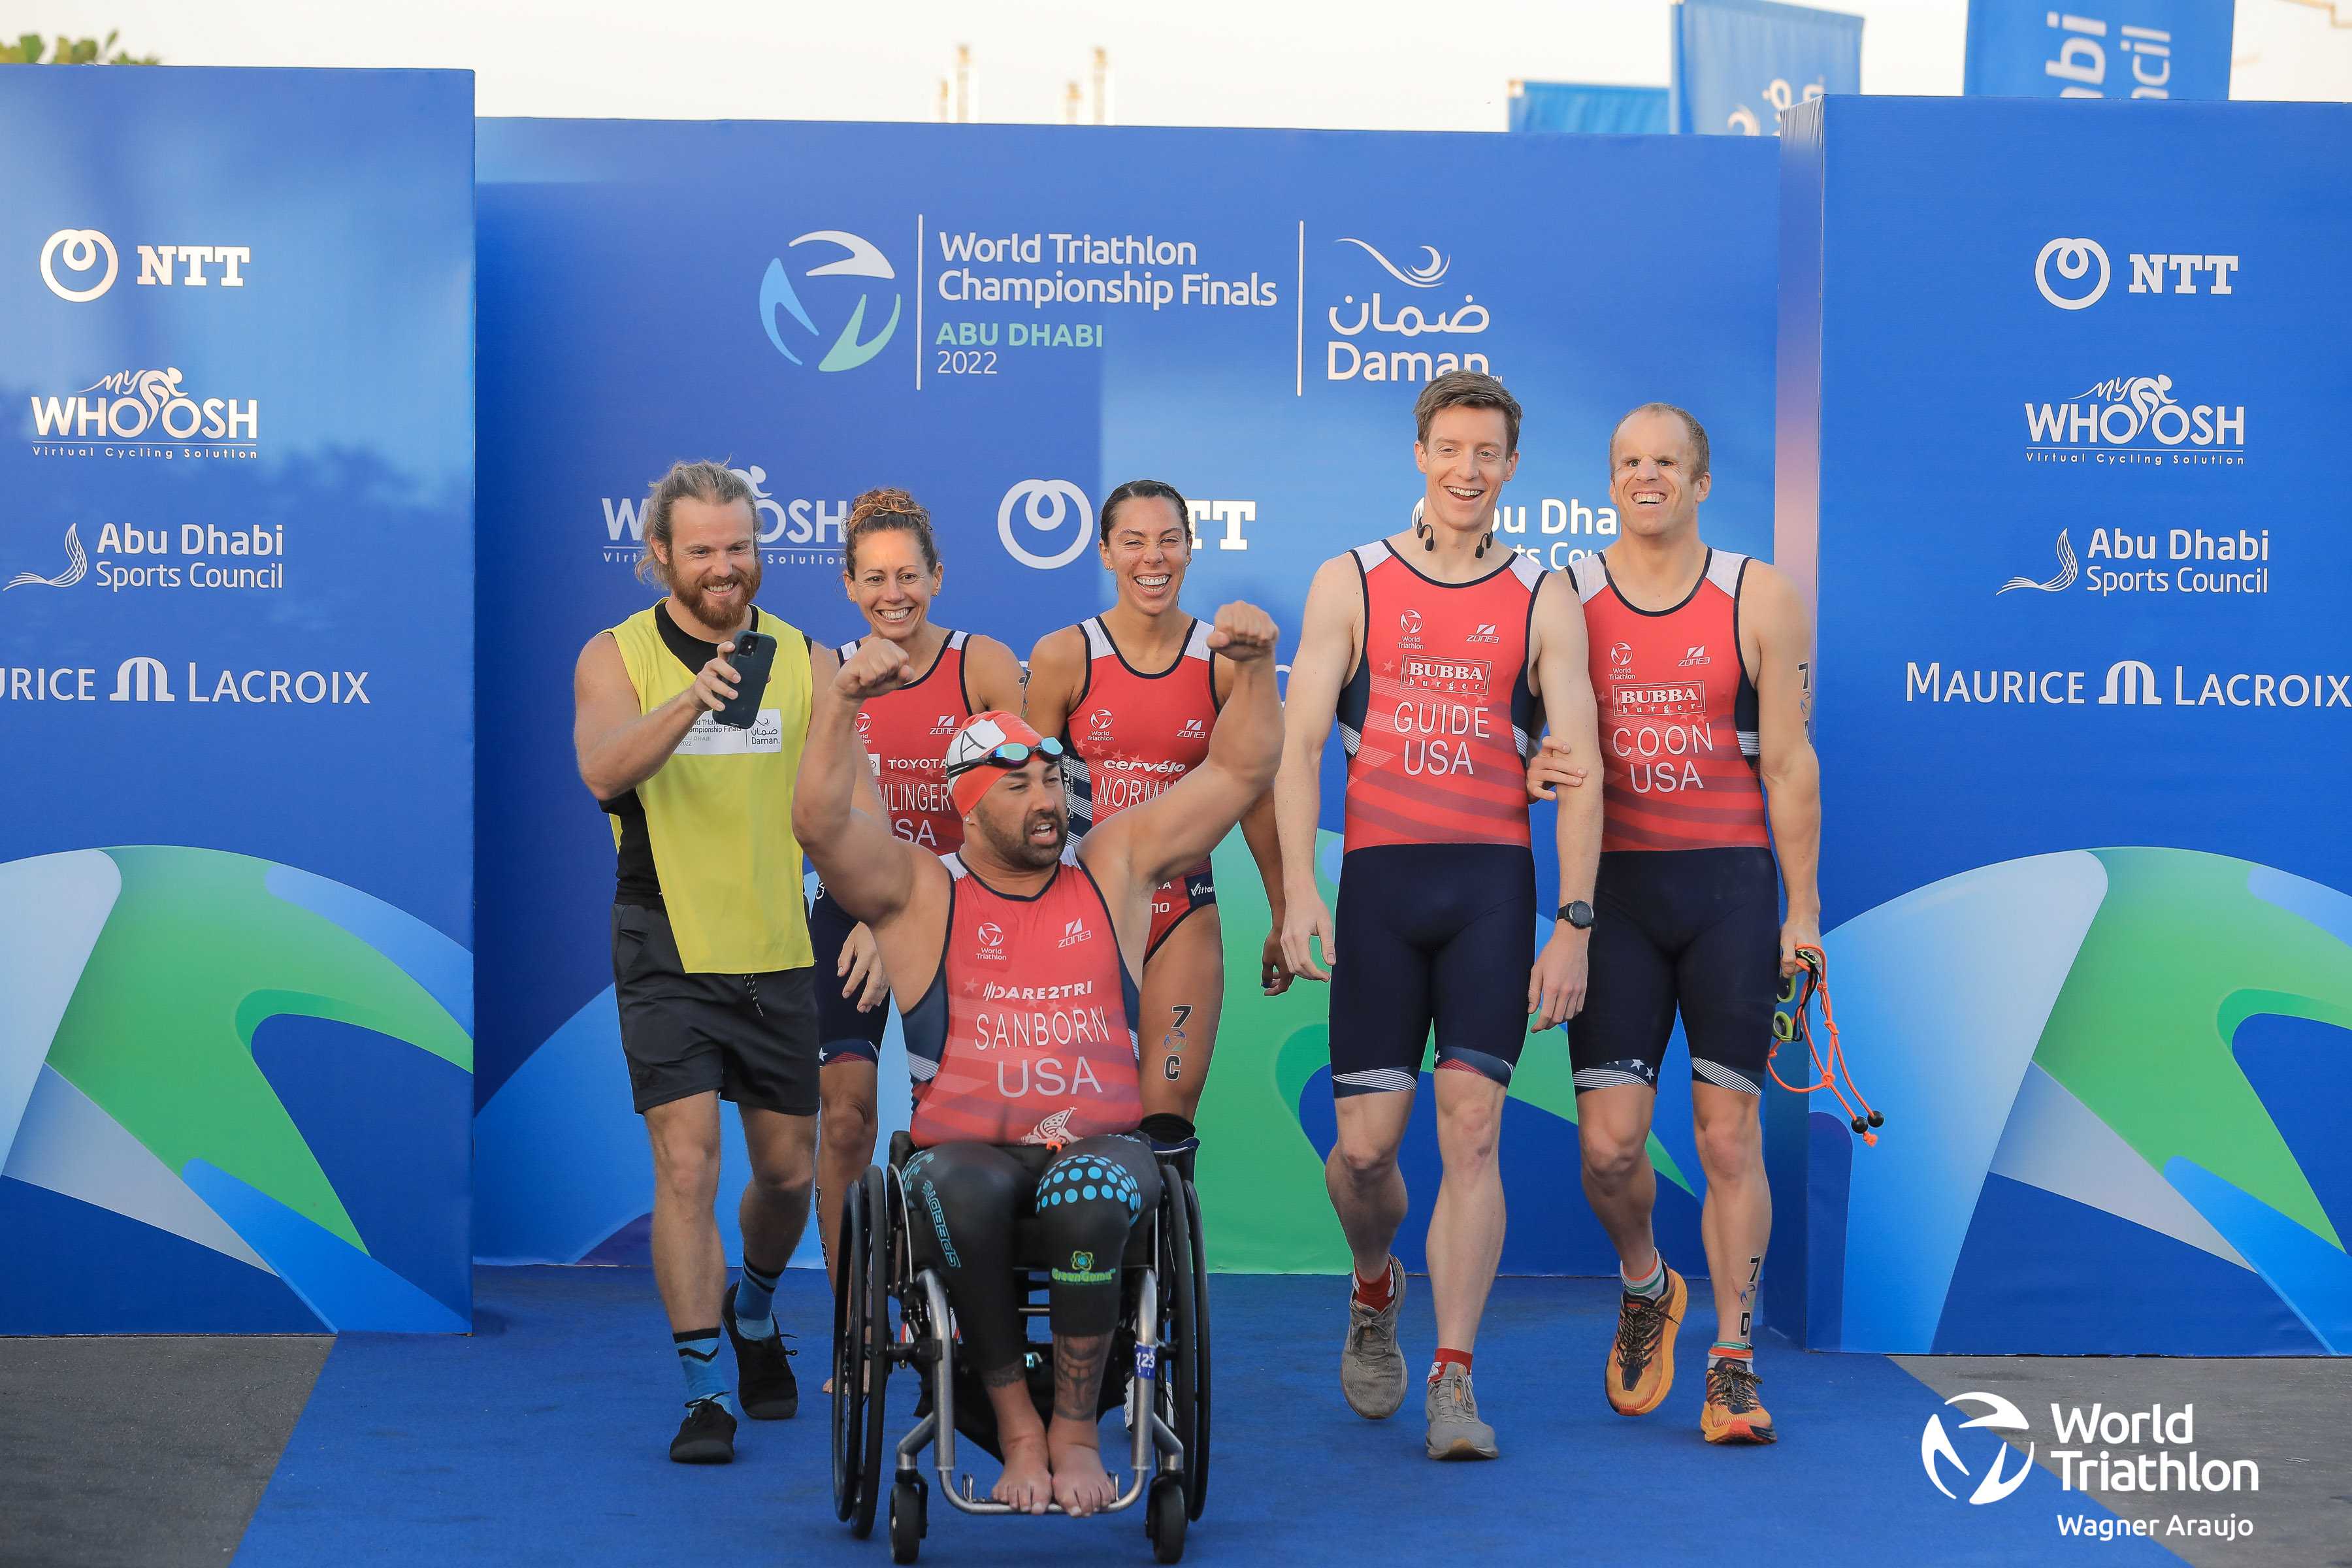 WTCS Abu Dhabi, Para Cup and Mixed Relay CANCELLED due to adverse